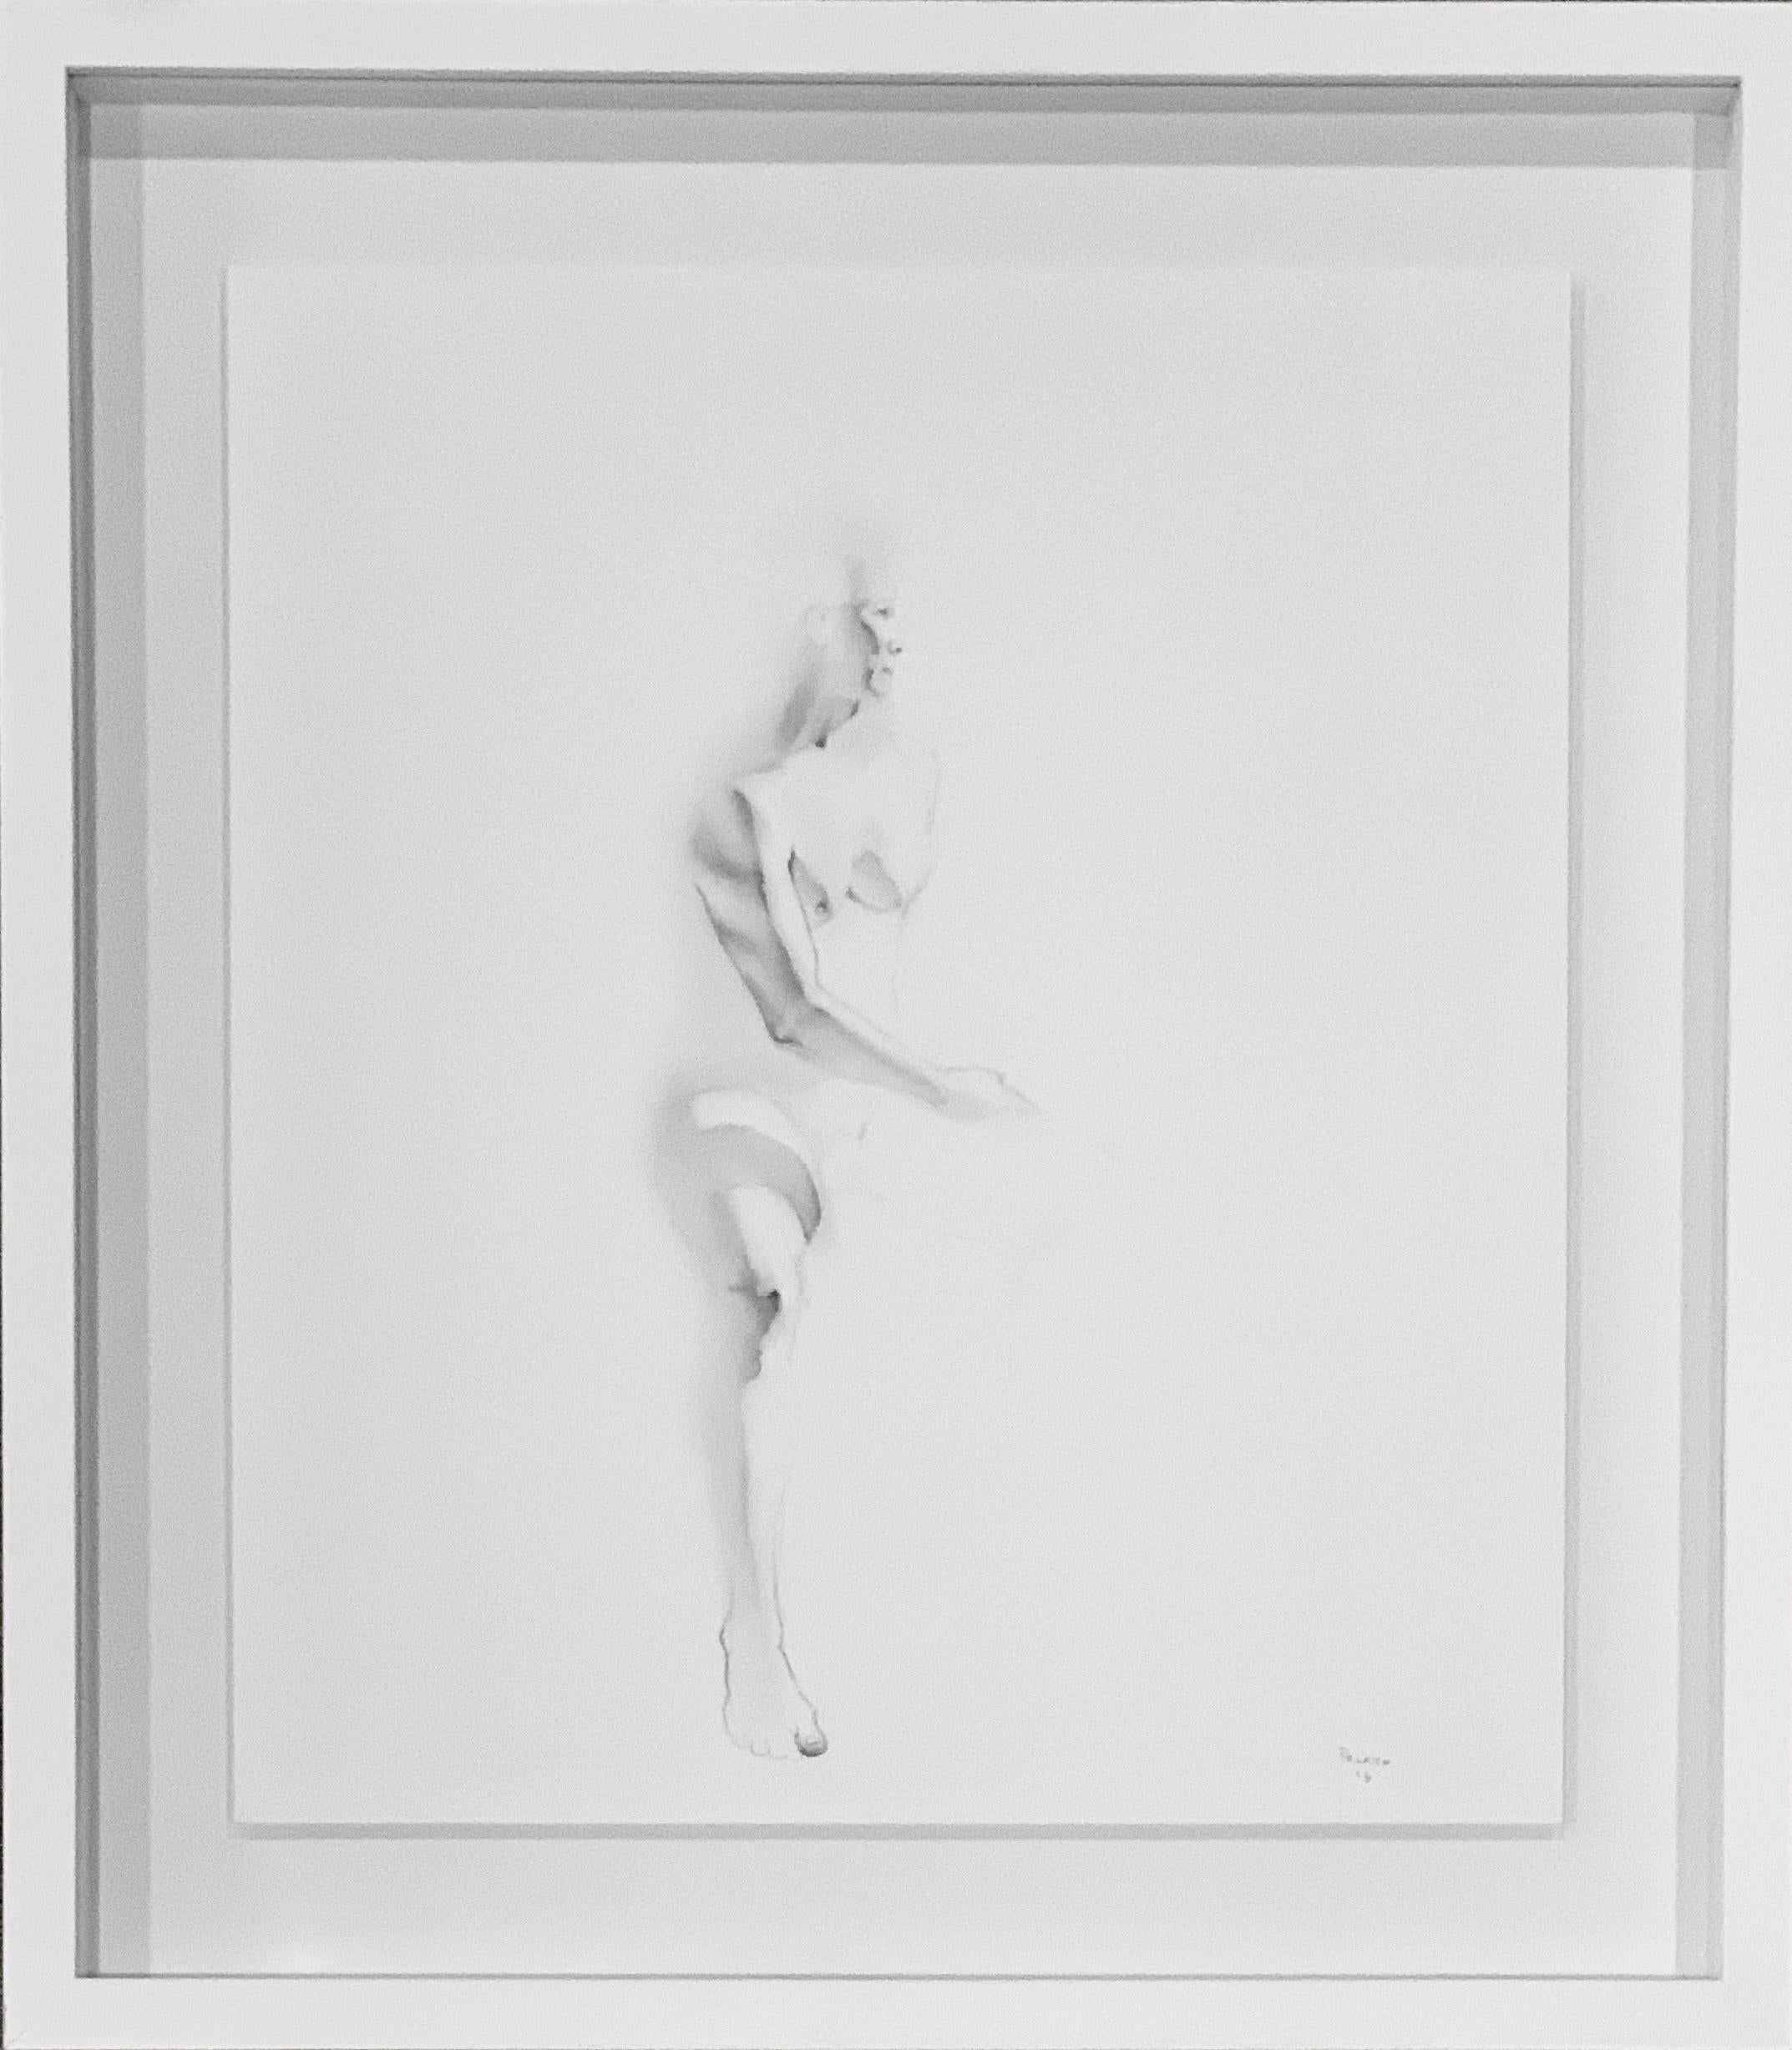 "Untitled 29" (FRAMED) Pencil Drawing 21" x 18" inch by Antonio Pelayo

Size unframed: 15.5" x 13.5" inch
Medium: Pencil on Paper

Artist Antonio Pelayo, born in Glendale, California, and yet raised for most of his childhood in the Mexican